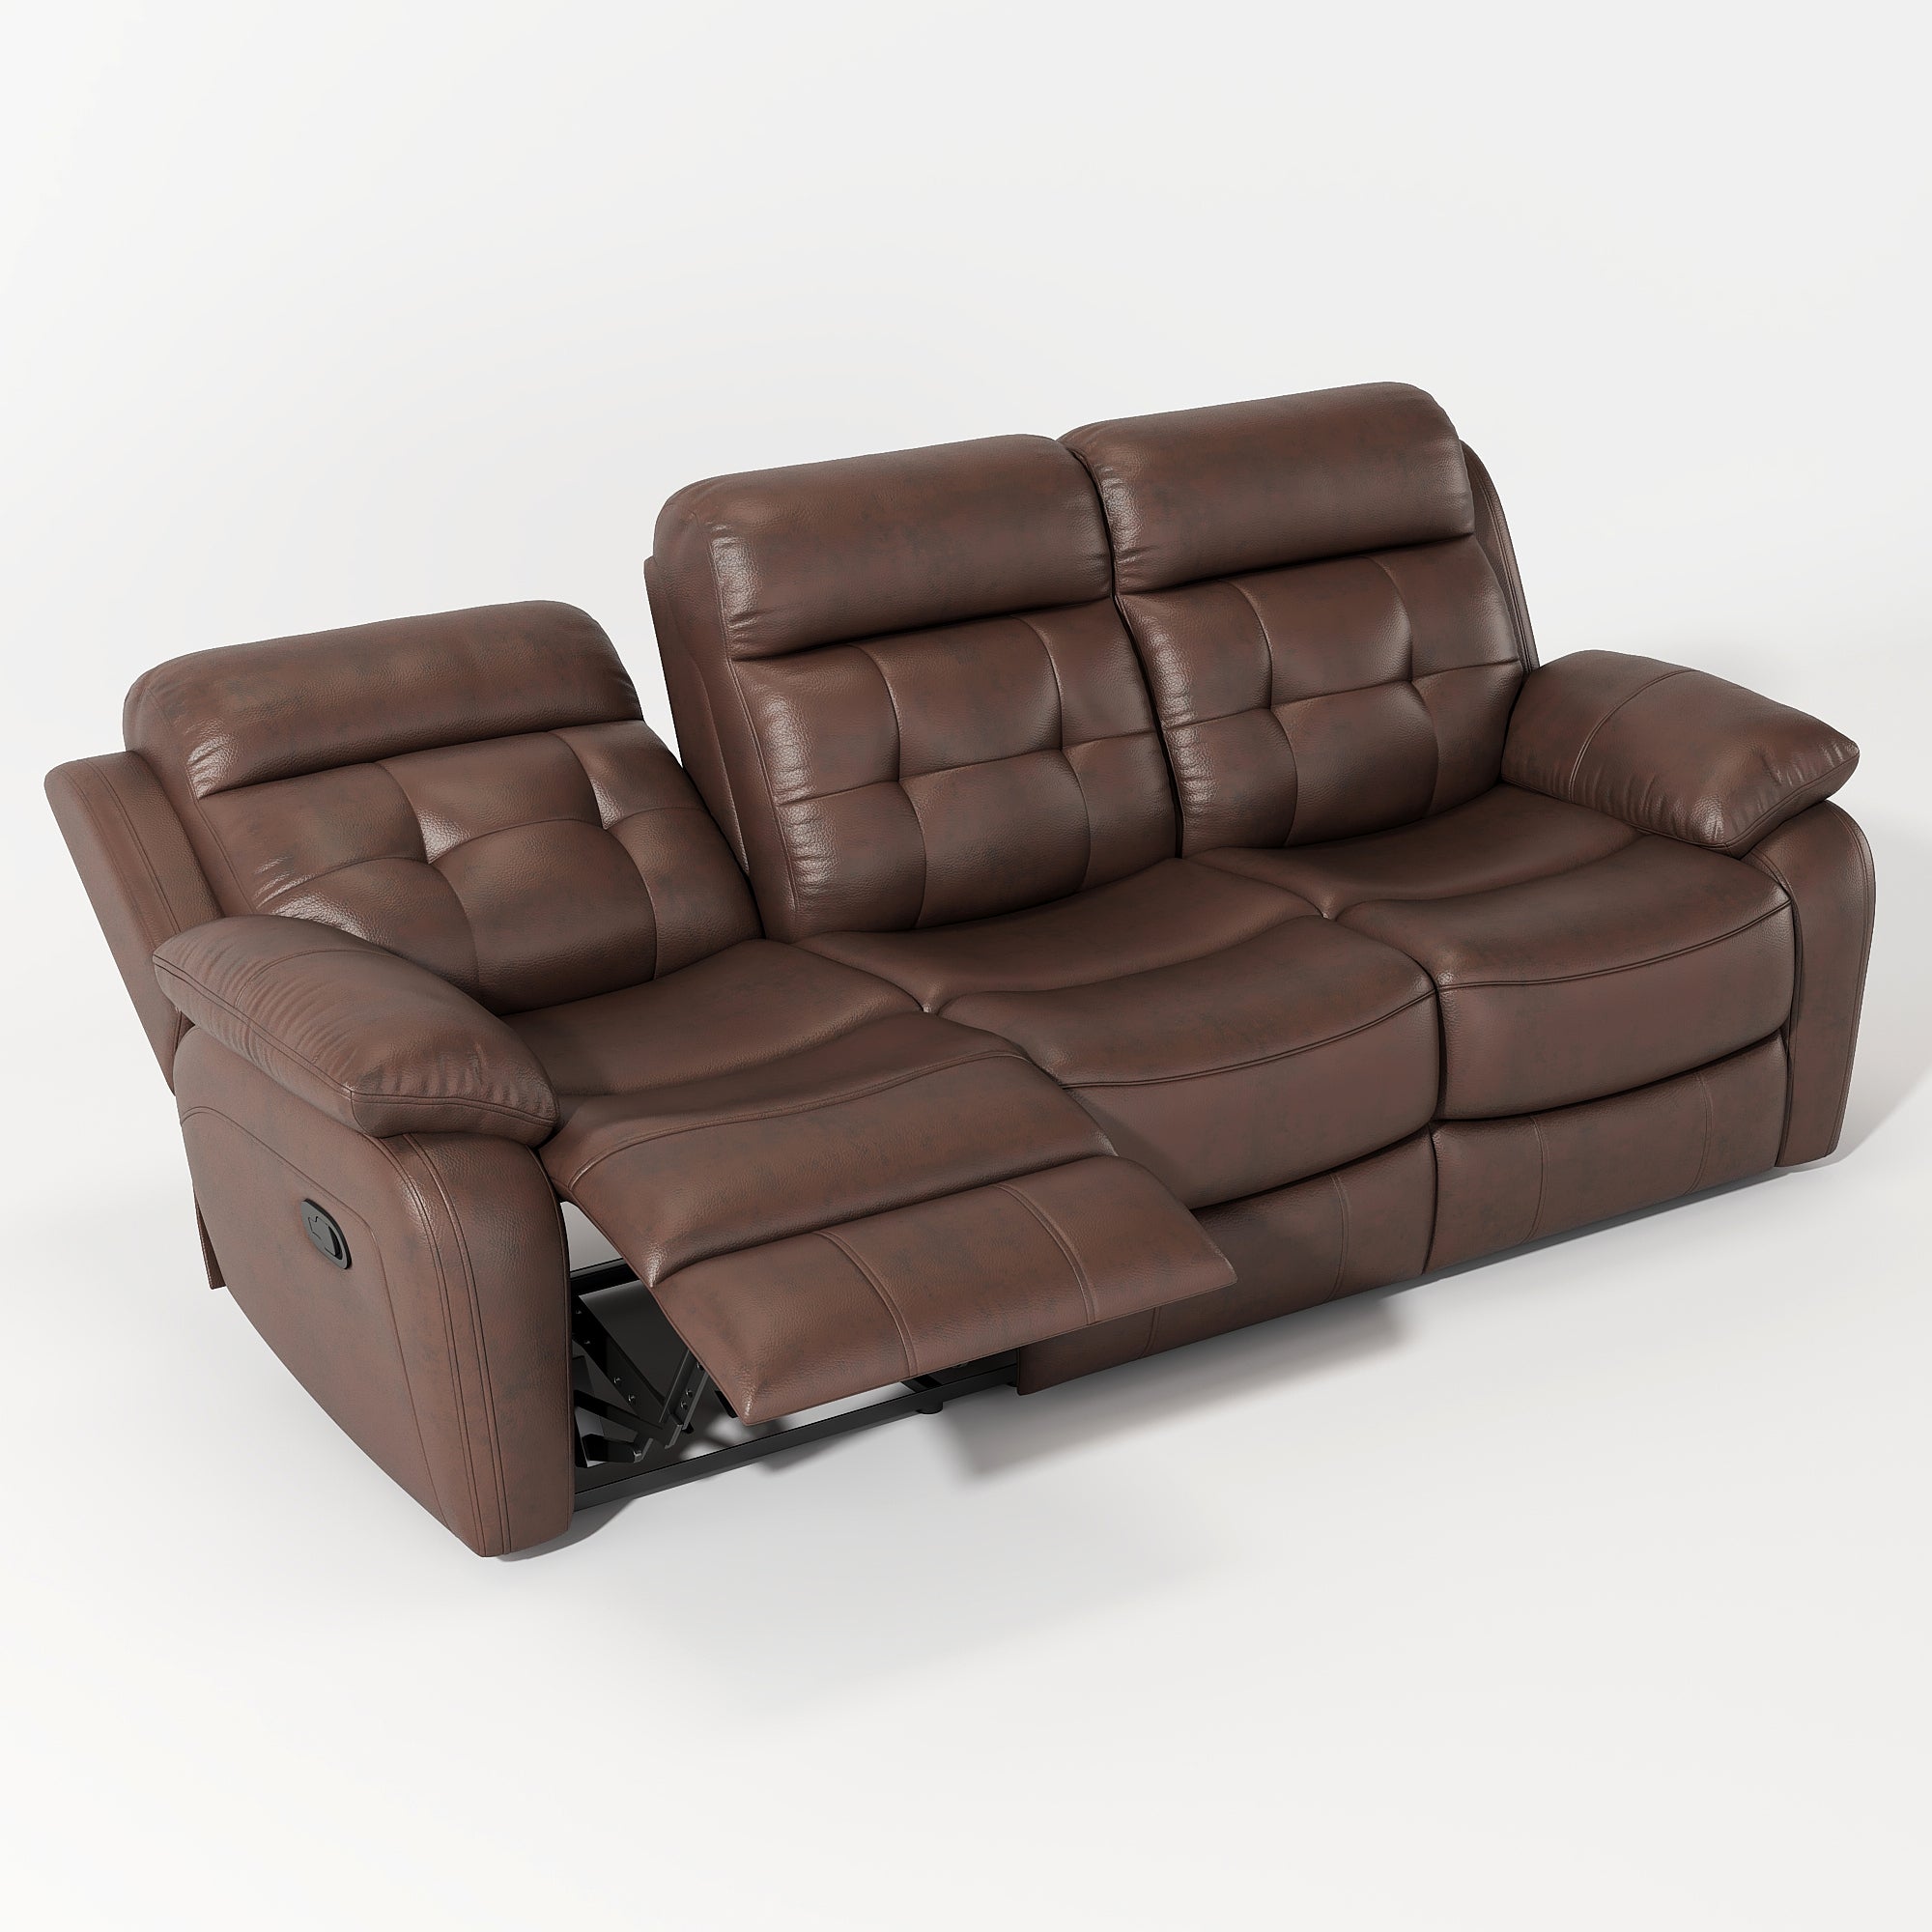 Genuine Leather Non Power Reclining Sofa with Drop brown-primary living space-american